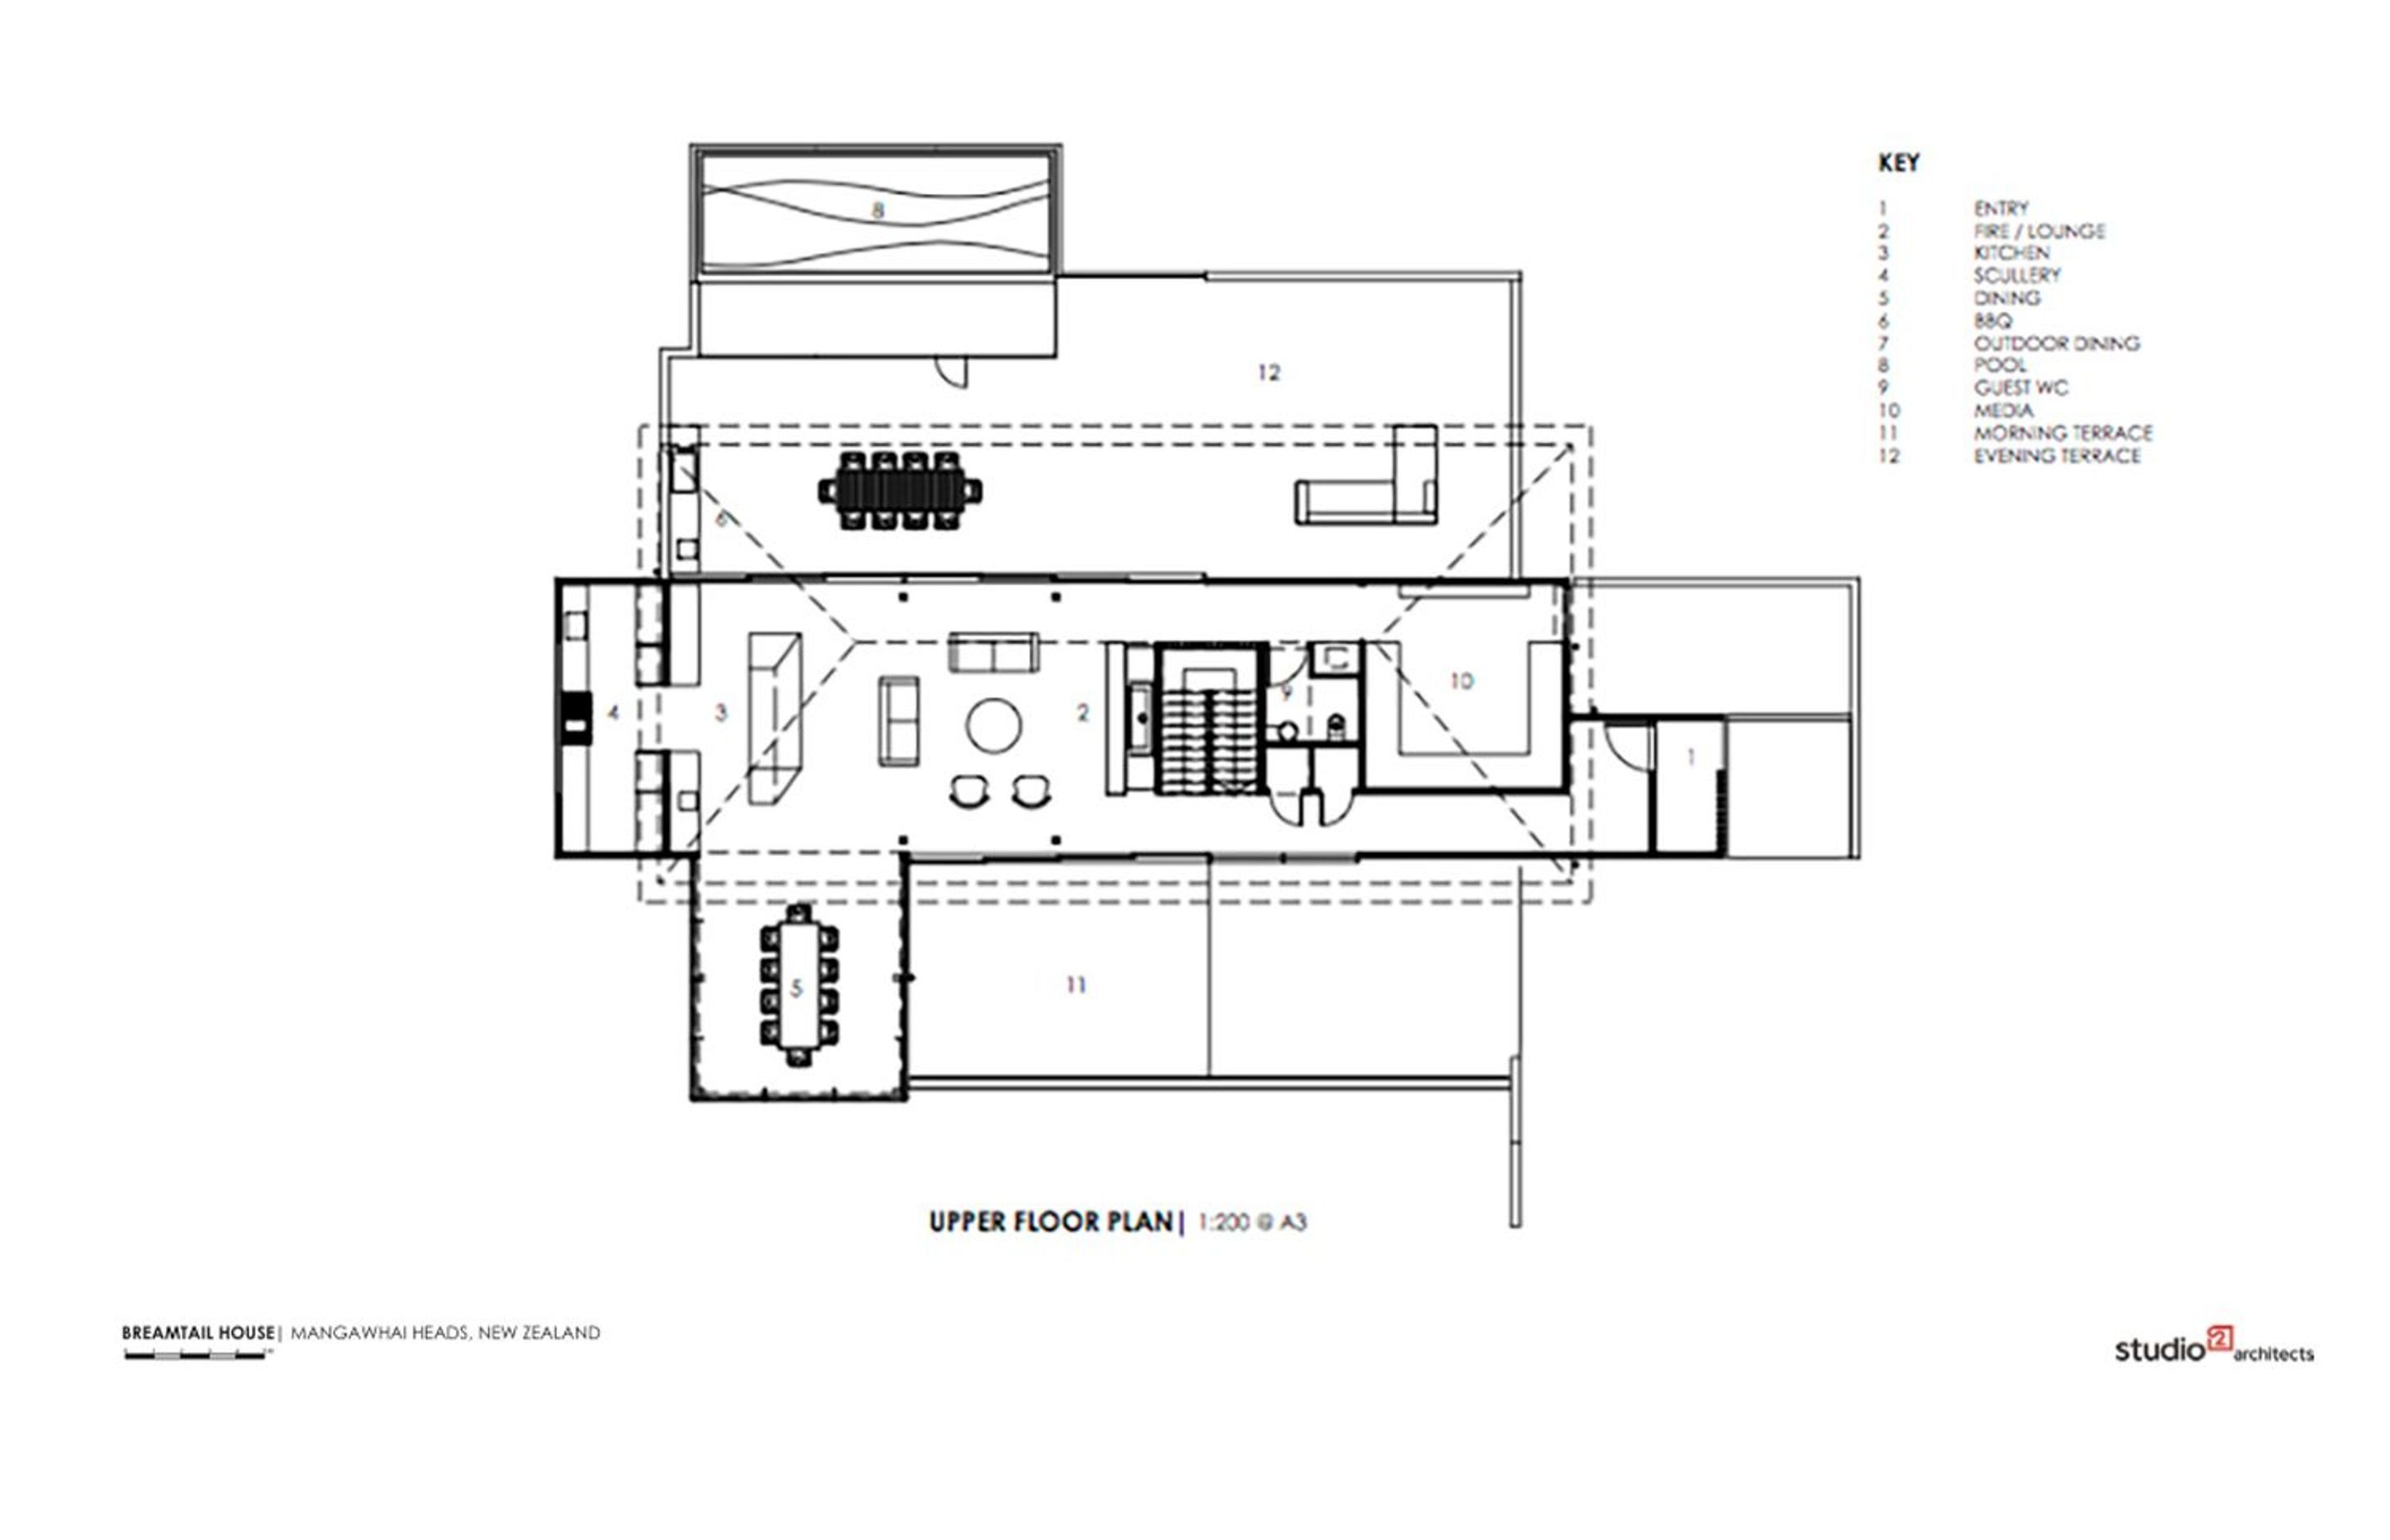 Breamtail House upper-floor plan by Studio2 Architects.